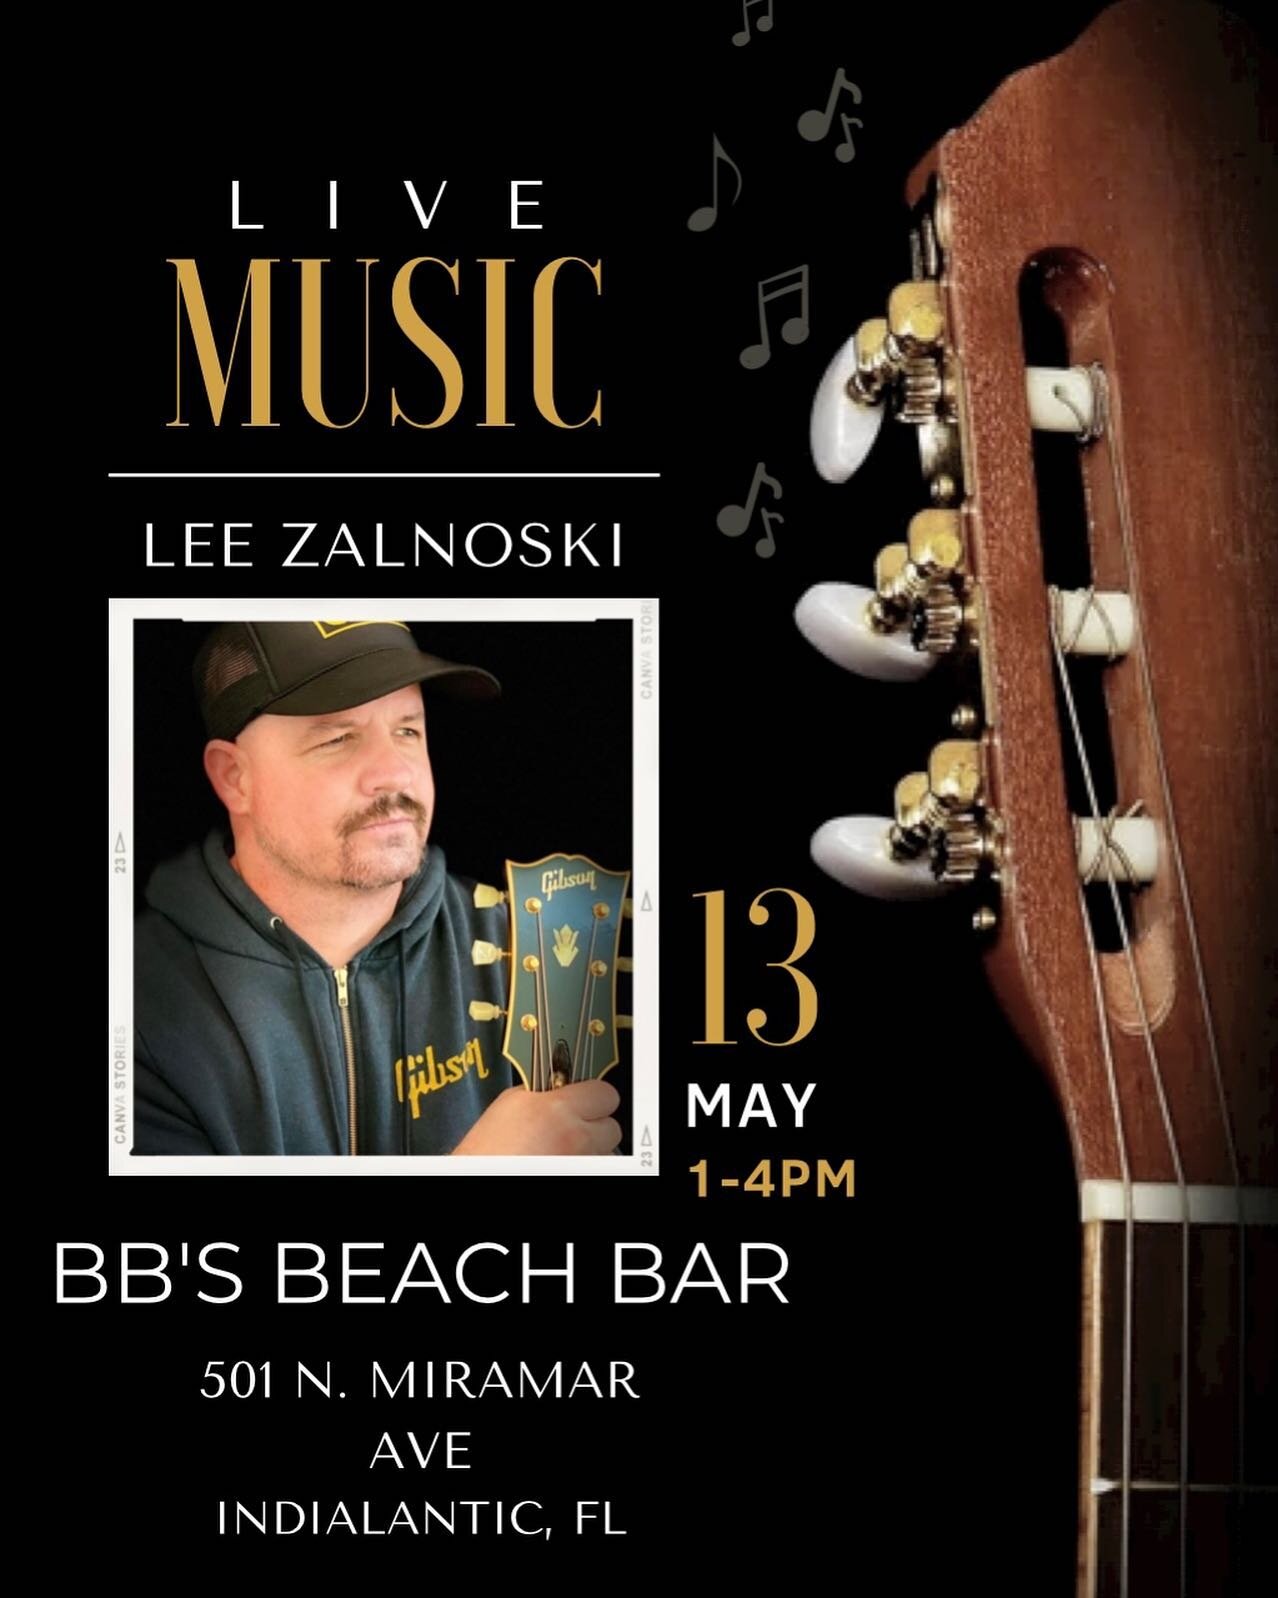 Please help us welcome Lee Zalnoski to BB&rsquo;s Beach Bar today!
He&rsquo;ll be playing from 1-4pm, so come grab some brunch and then stick around for some great local LIVE music!
Happy Saturday!!
☀️🎶🍽️🥂🌴🍻